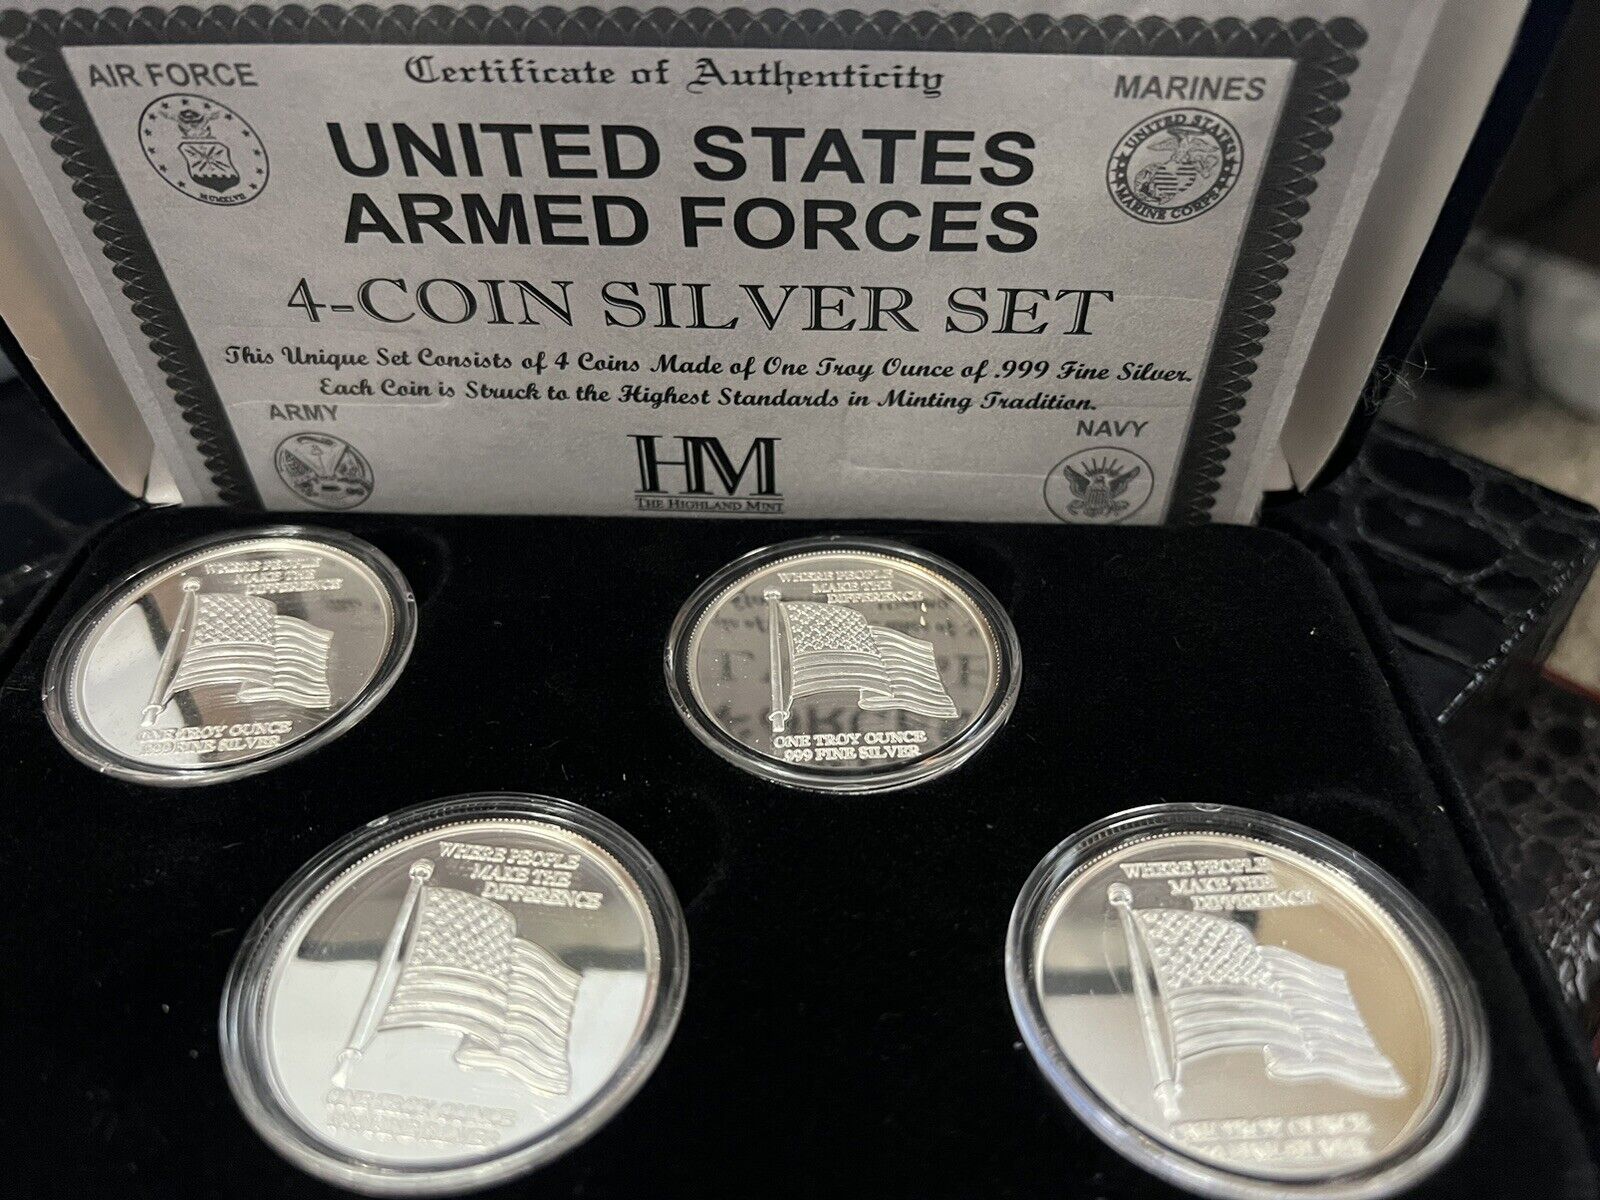 US Armed Forces 4-Silver Coins Set - Each Coin Has One Troy Oz. Of .999 Silver